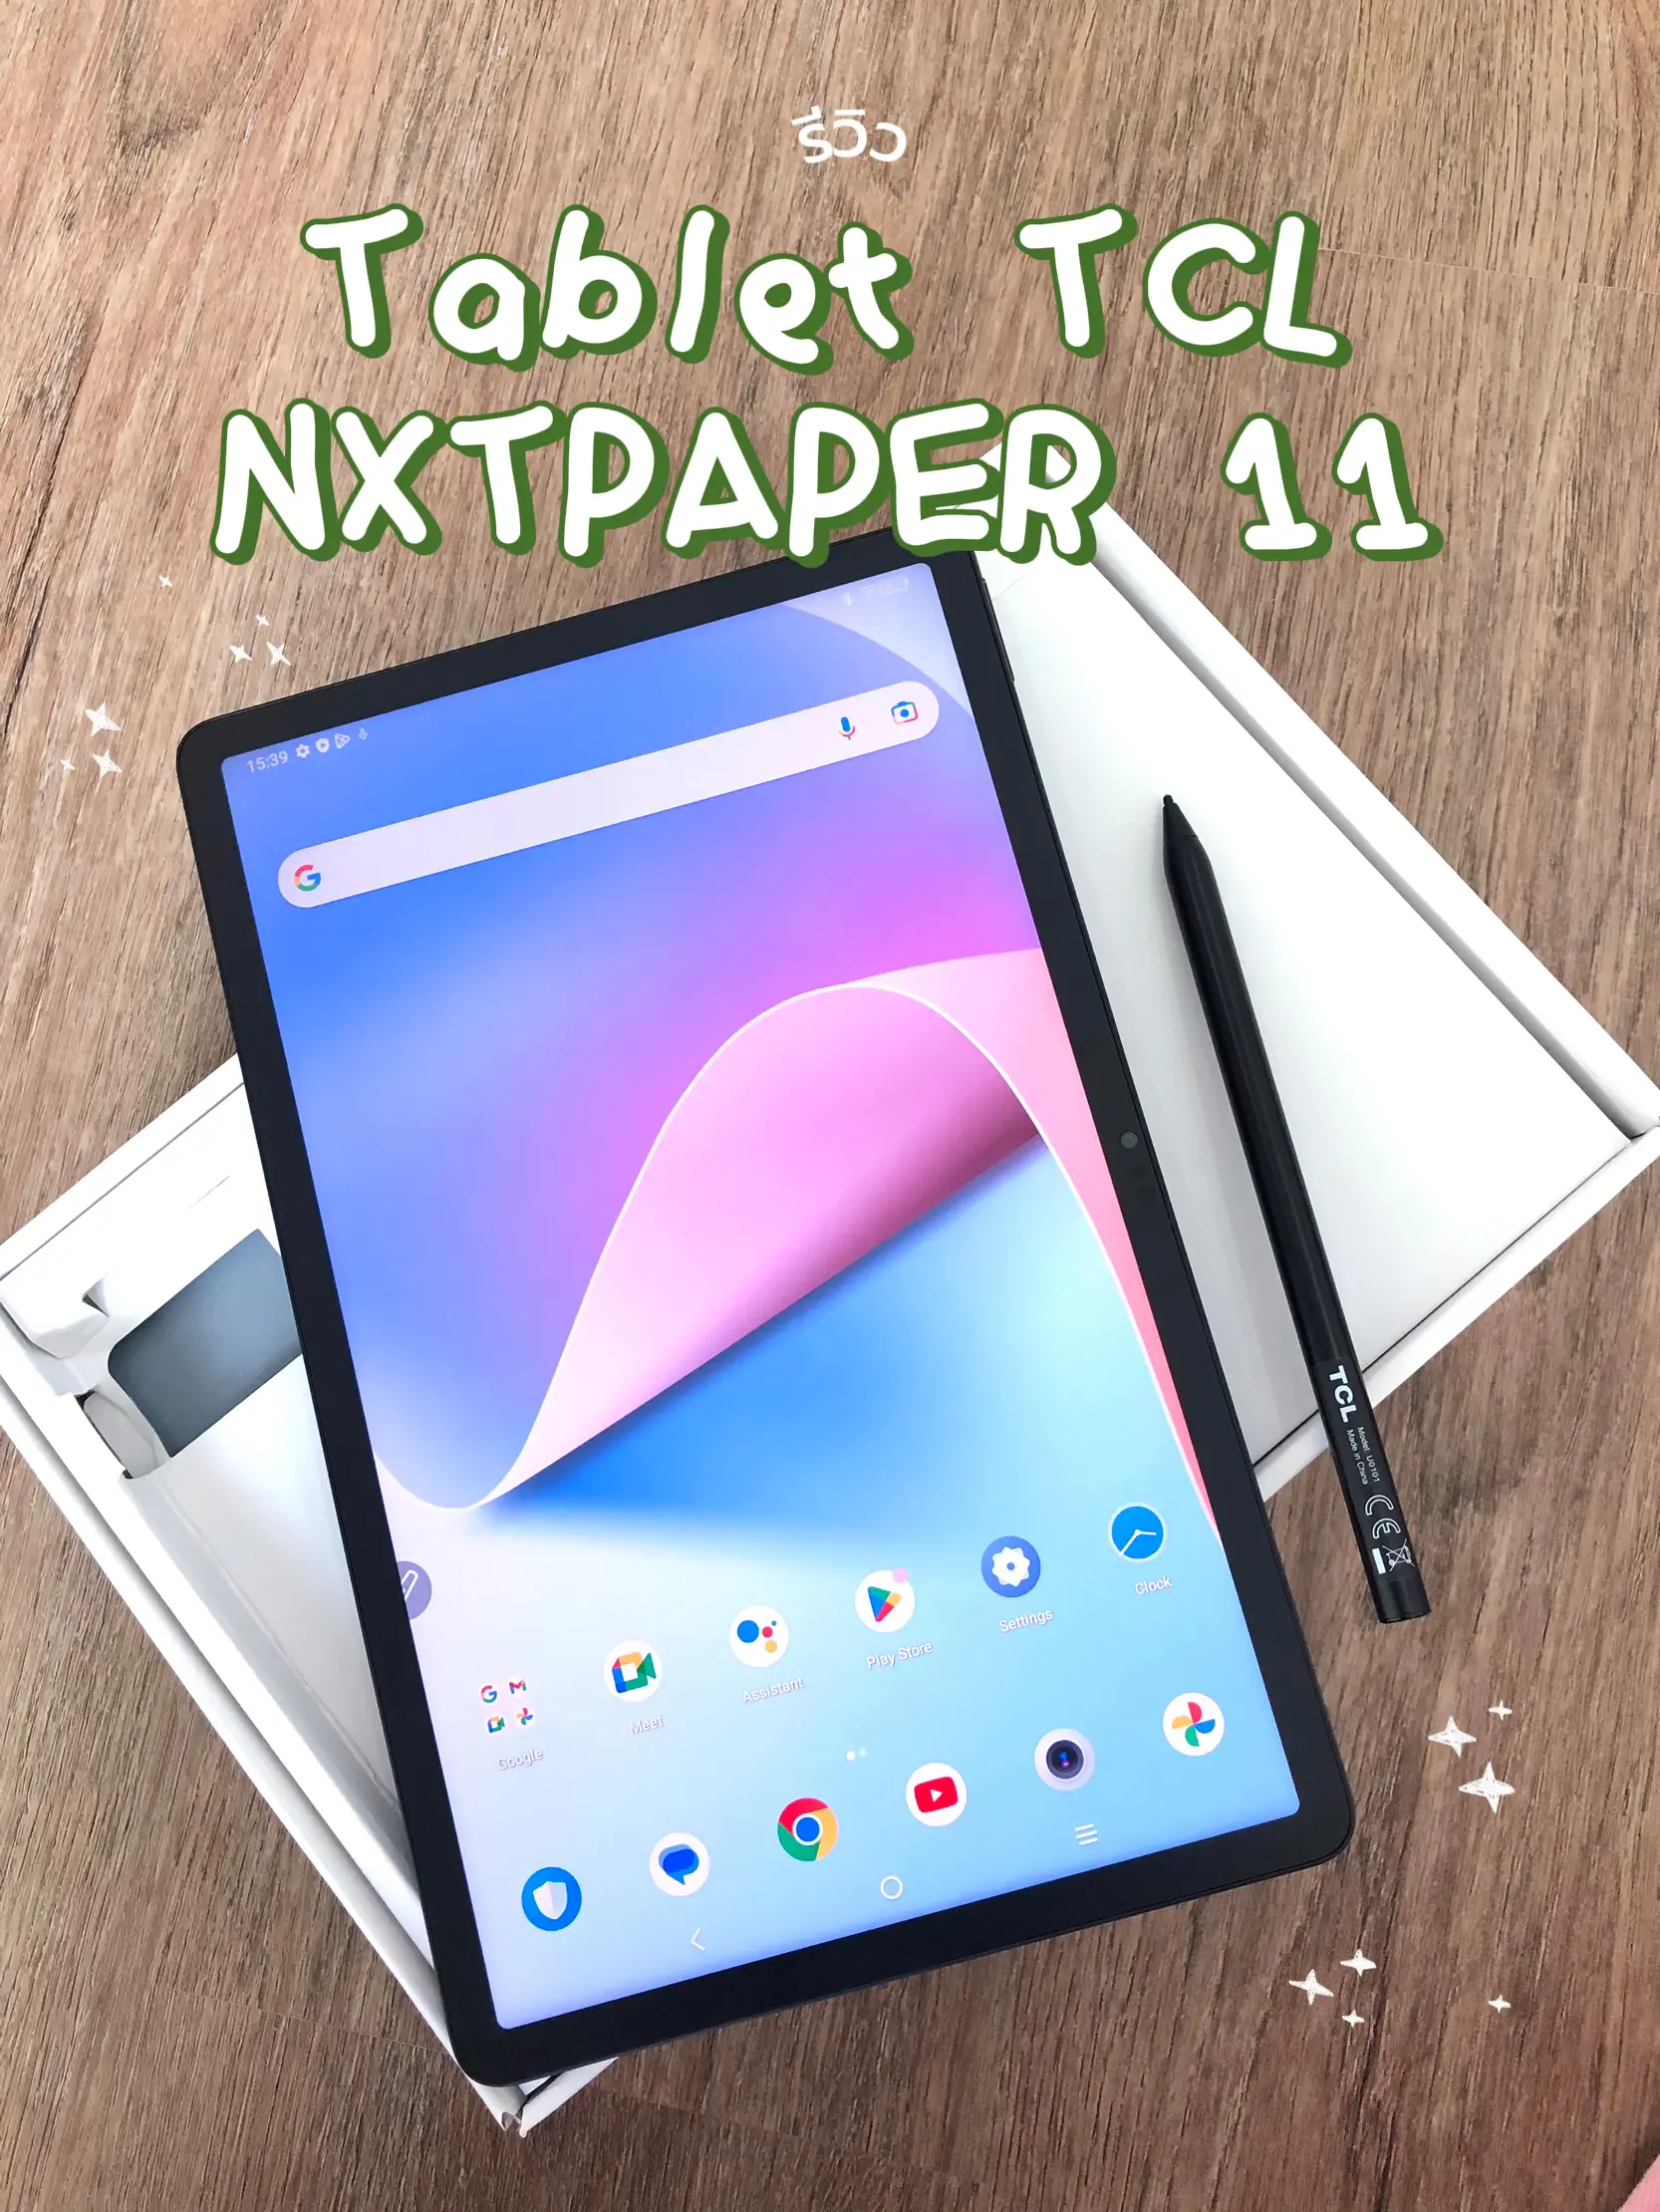 Video Review Tablet TCL NXTPAPER 11 